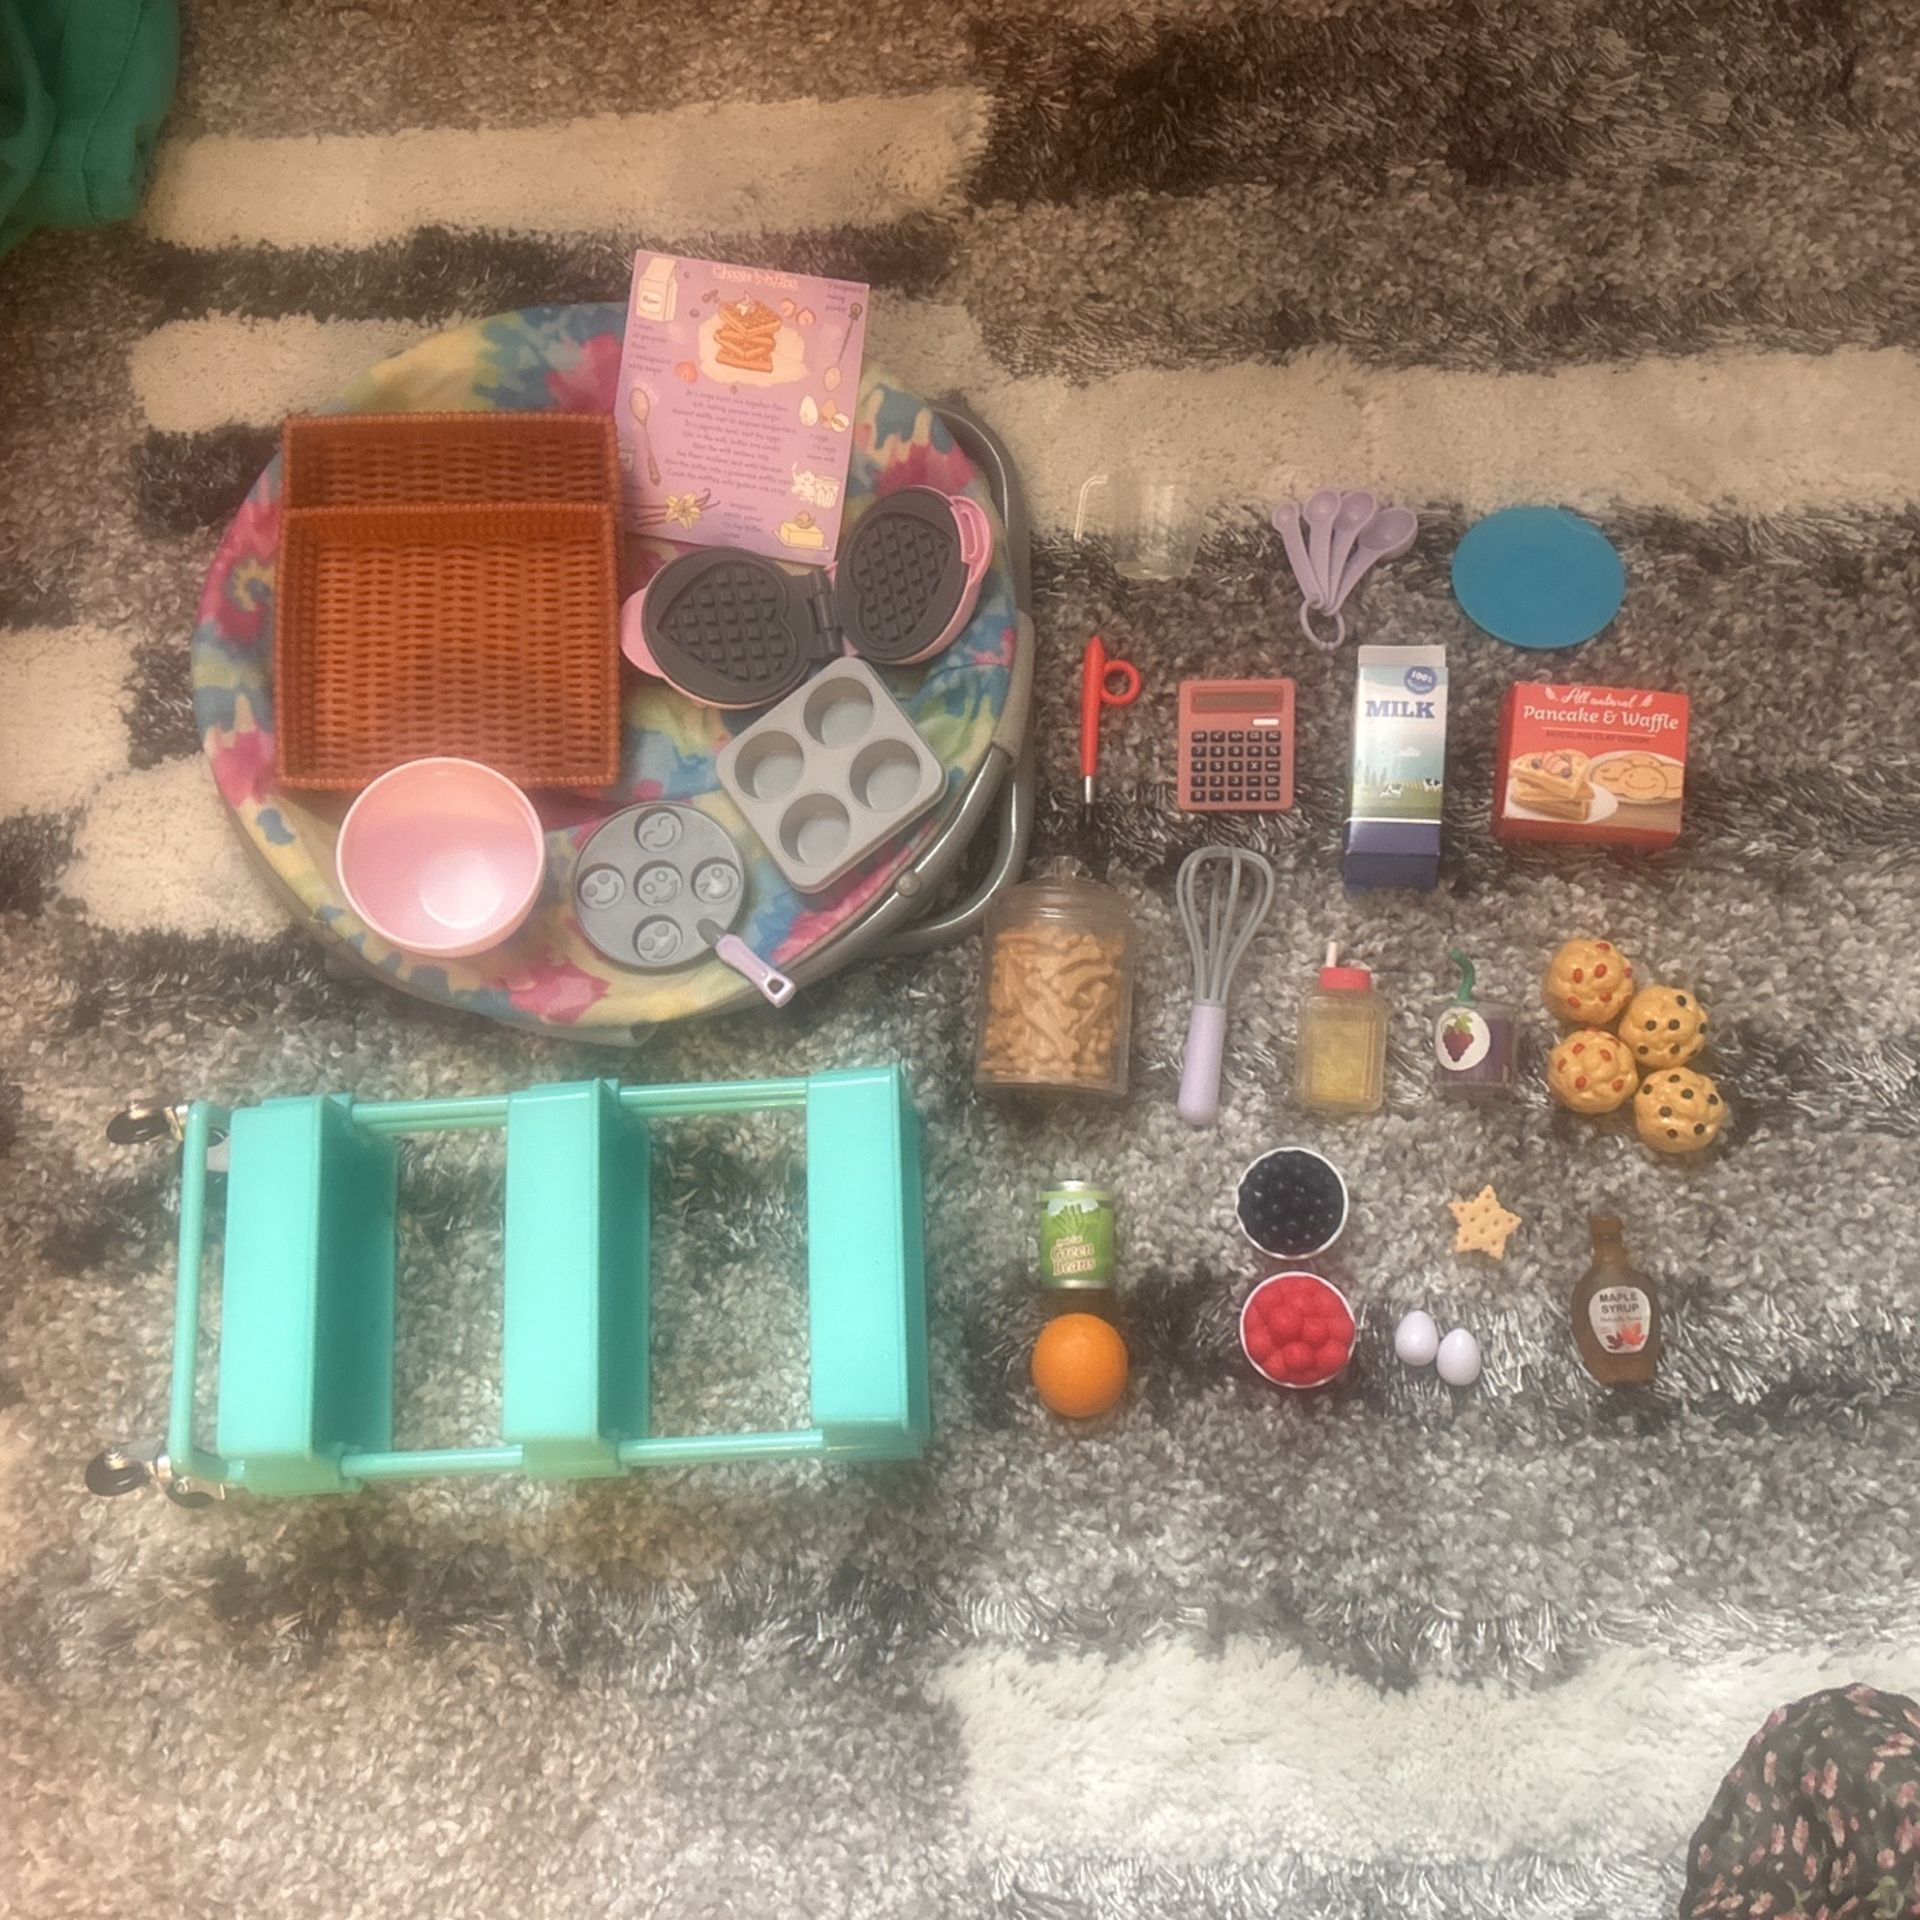 Small american Girl Doll toys: Making breakfast set,cart and foldout chair